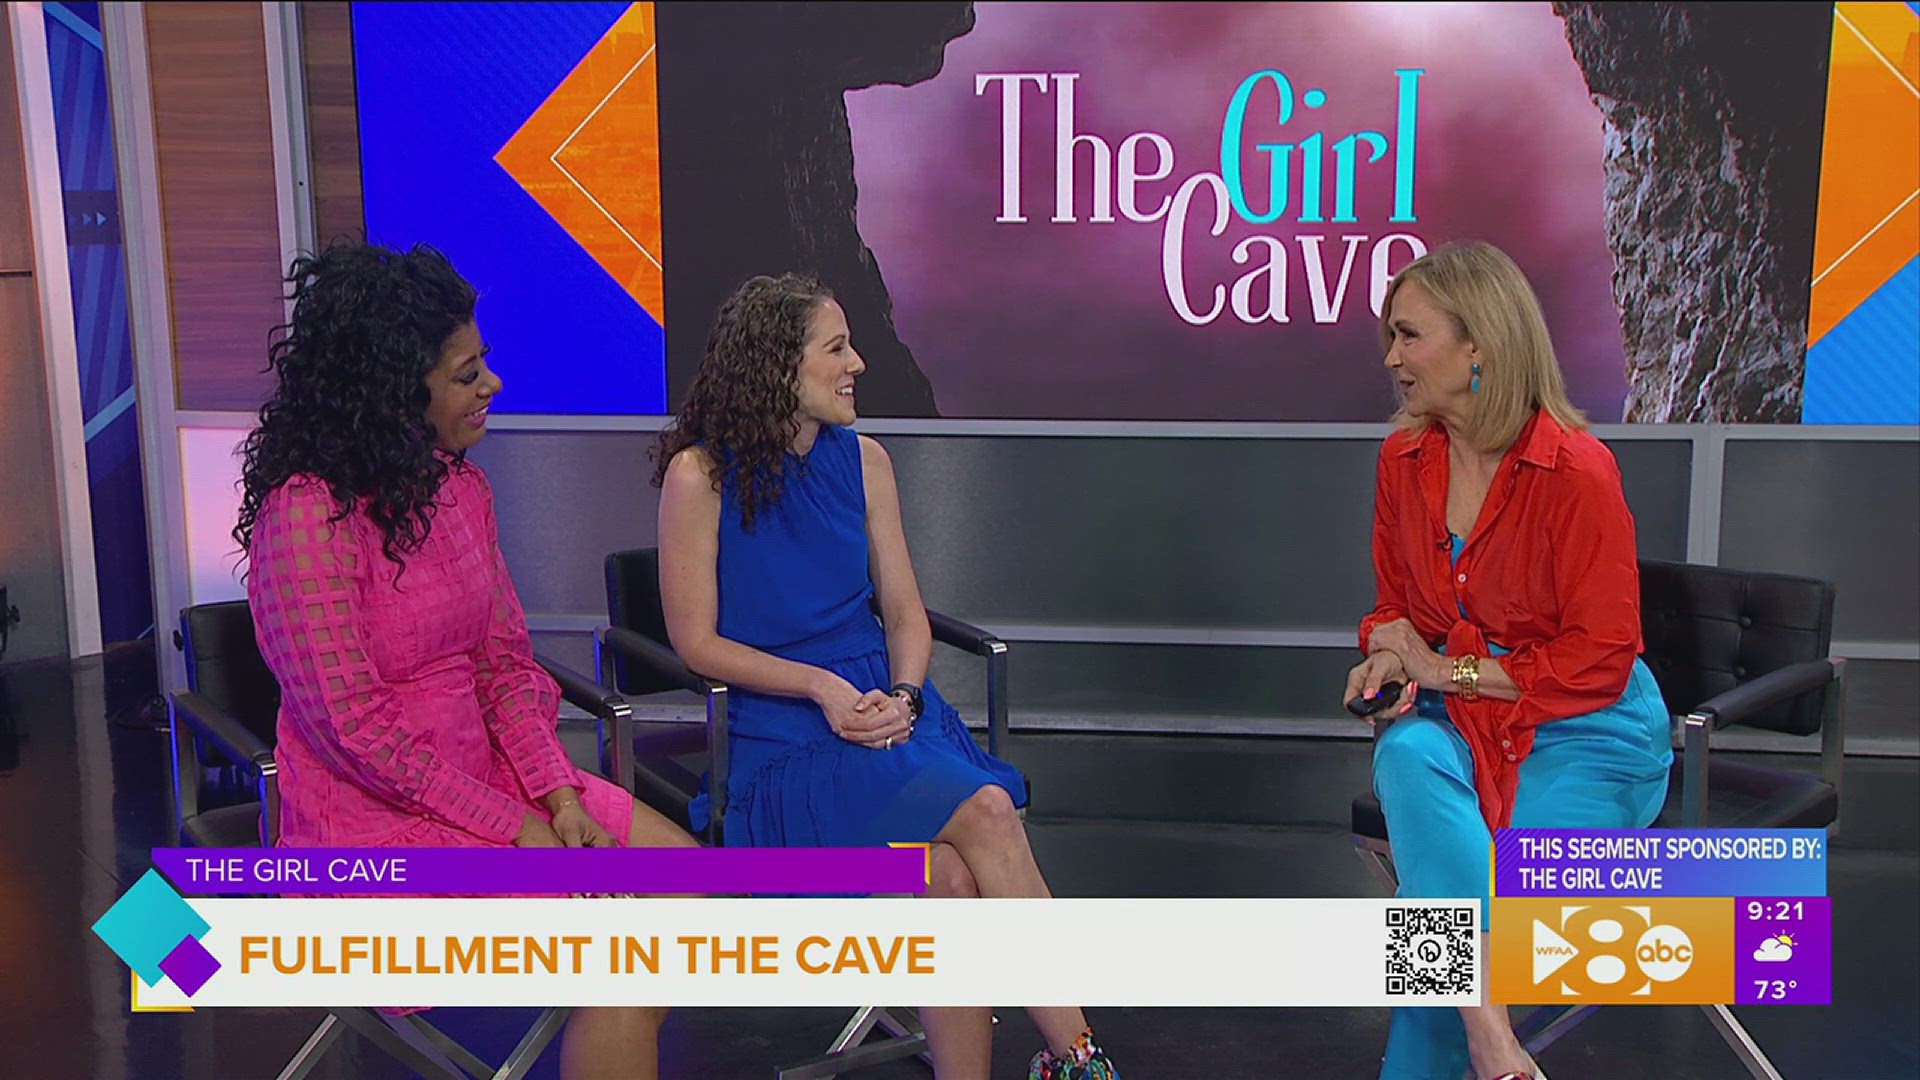 The Girl Cave Founder Krista Medlock highlights The Bridge to Fulfillment. This segment is sponsored by The Girl Cave. Go to thegirlcavetribe.online for more info.